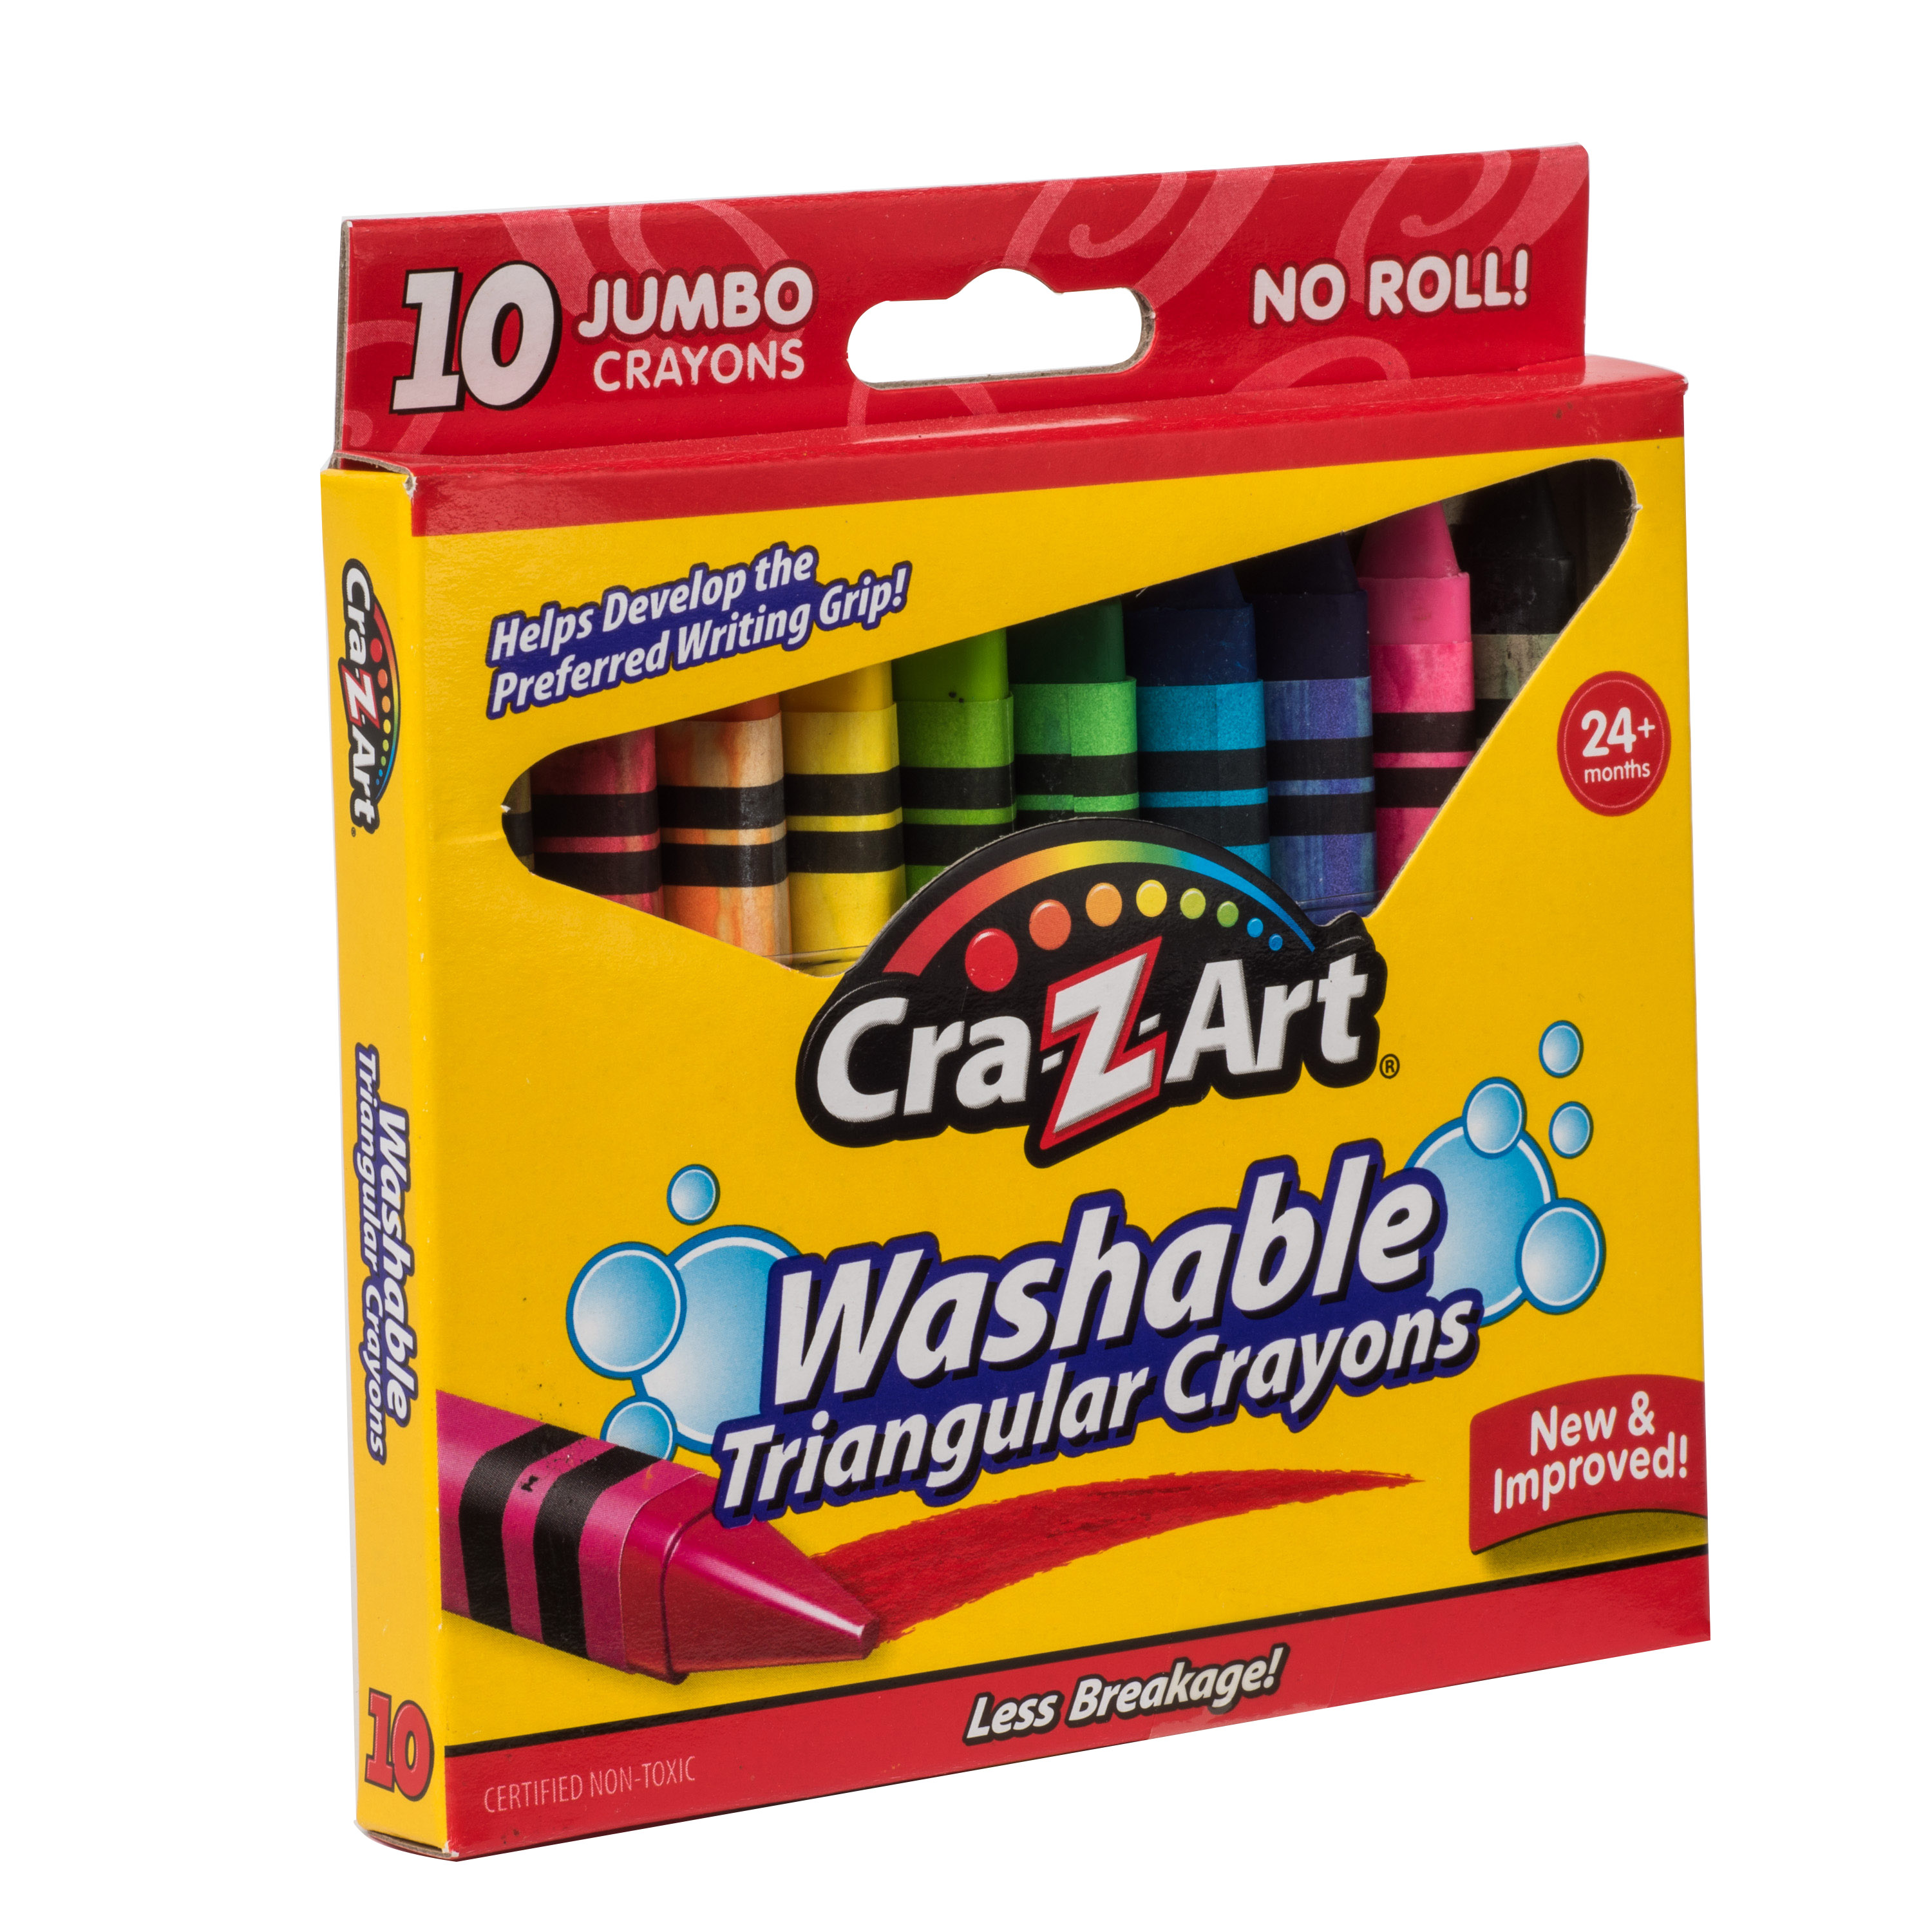 Cra-Z-Art Jumbo Washable Triangular Crayons, 10 Count, Assorted Colors, Back to School Supplies - image 5 of 9